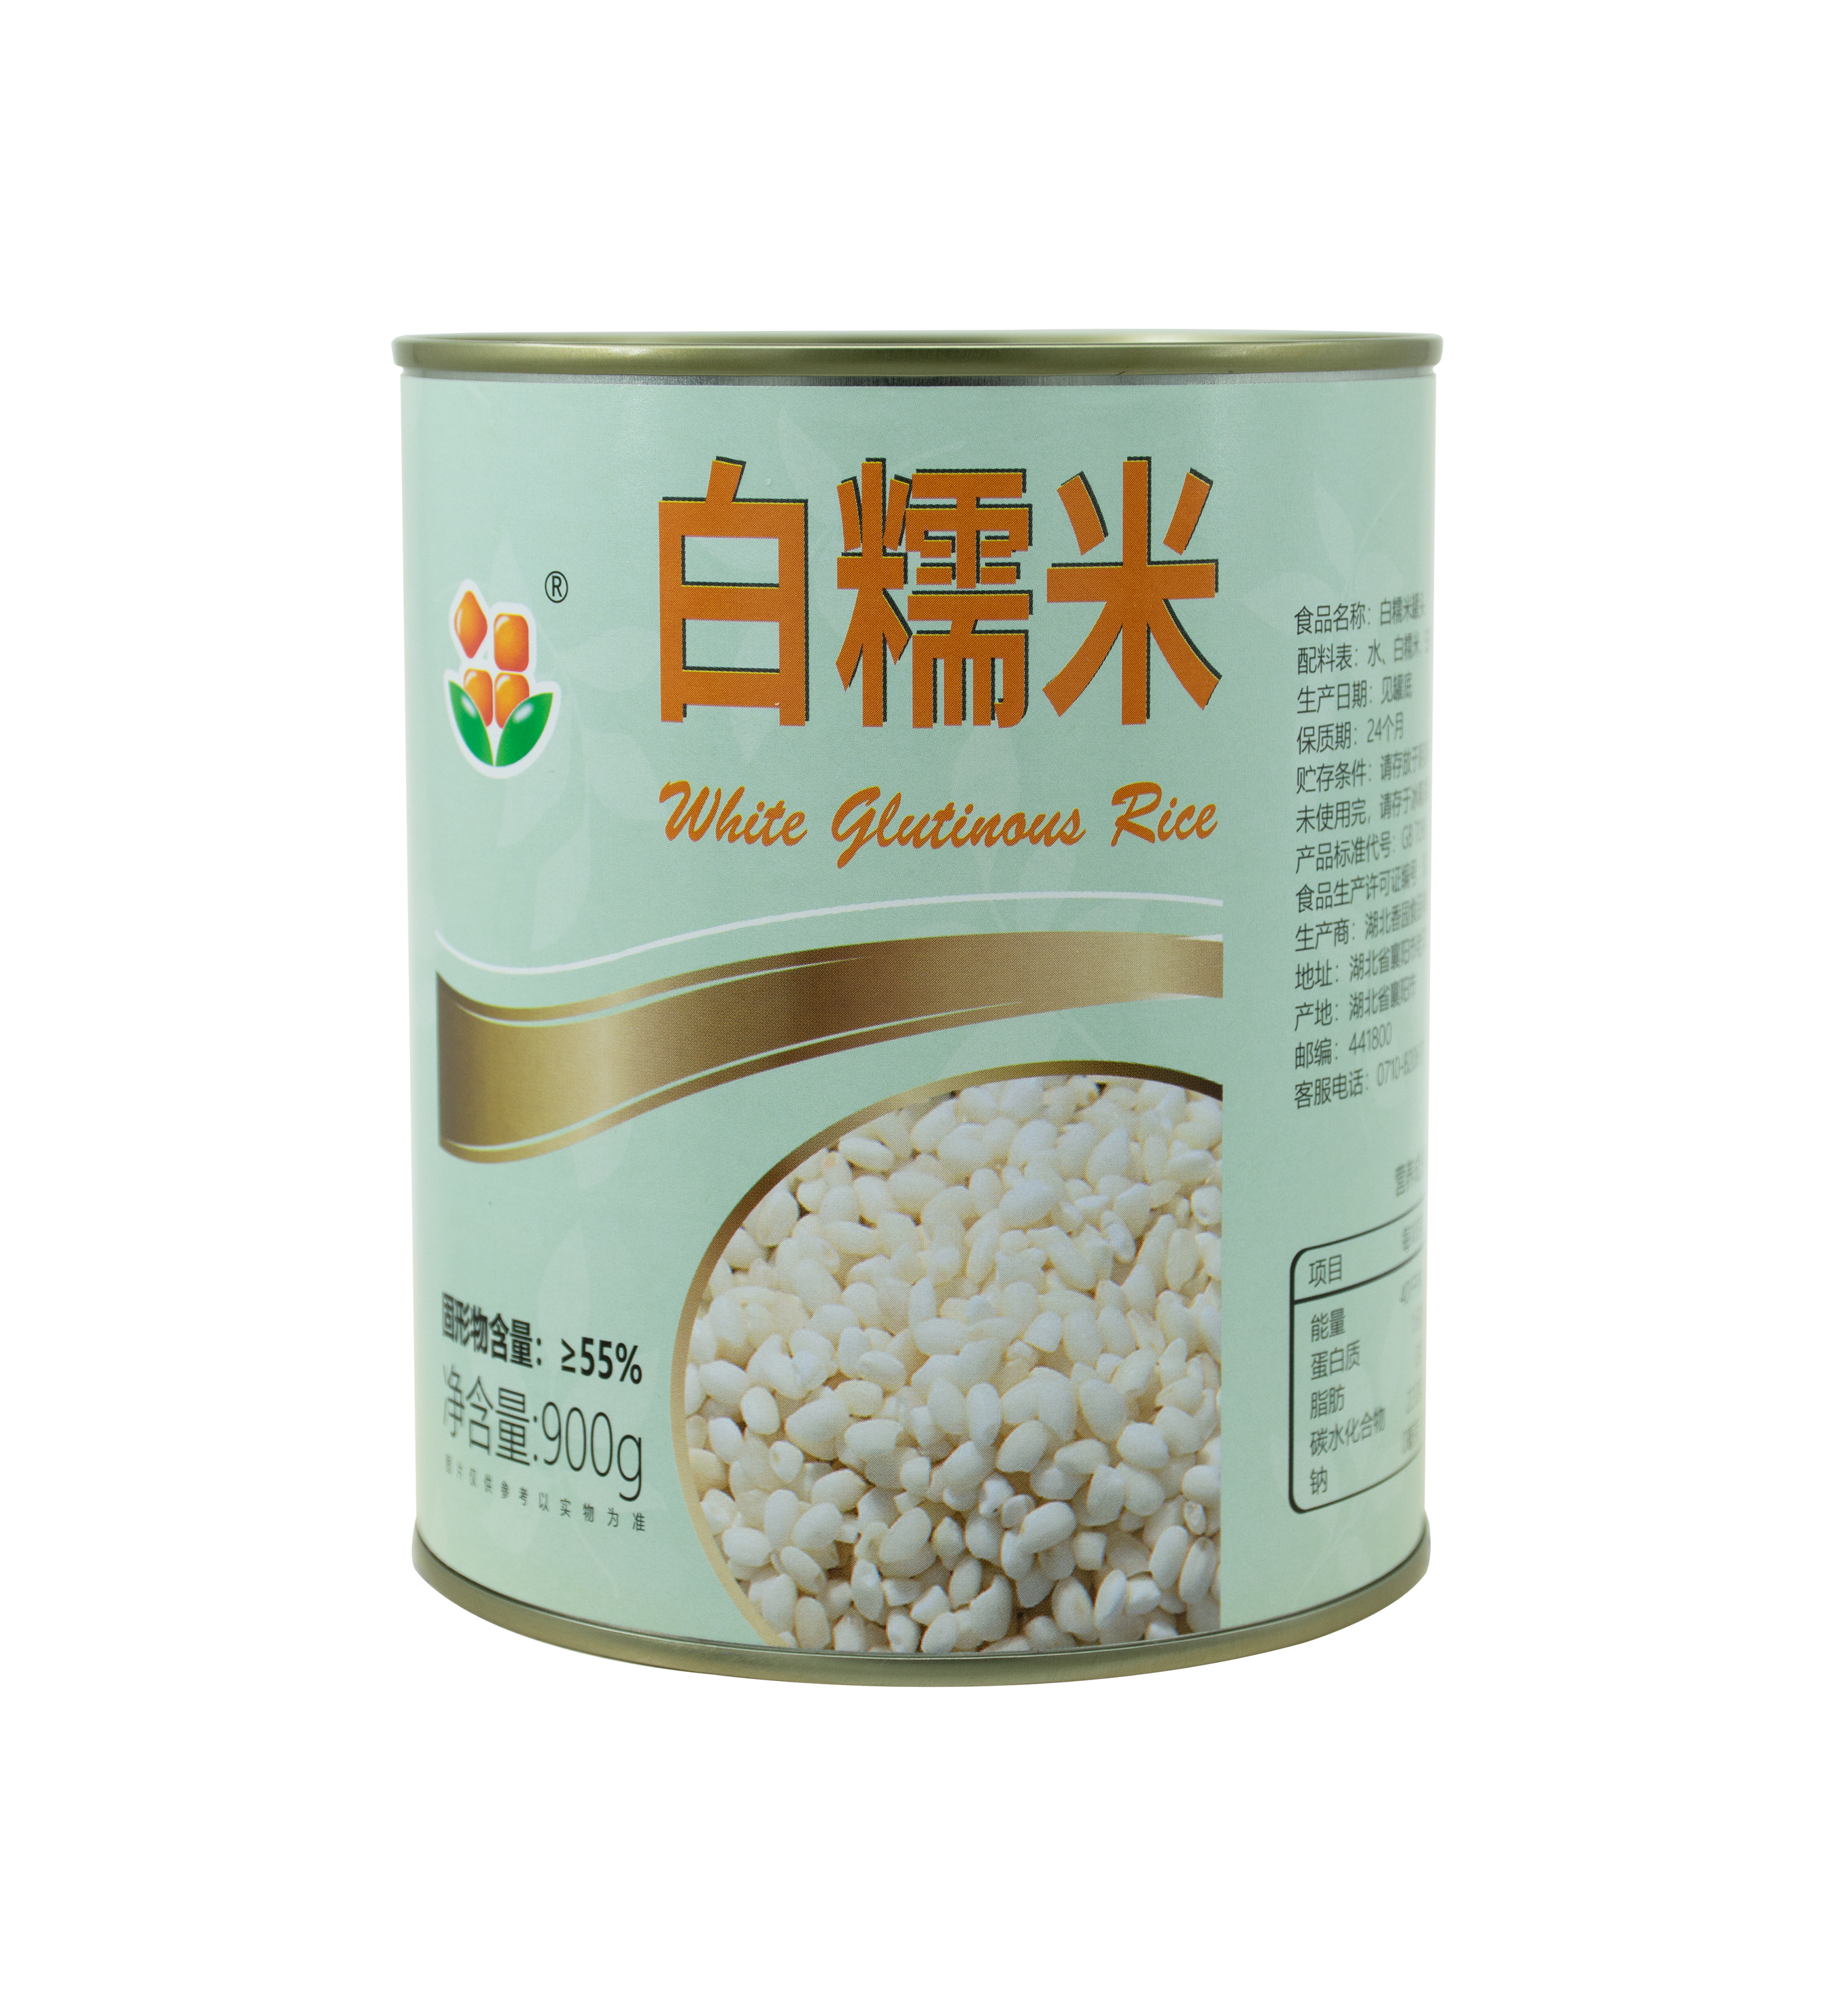 Canned white glutinous rice